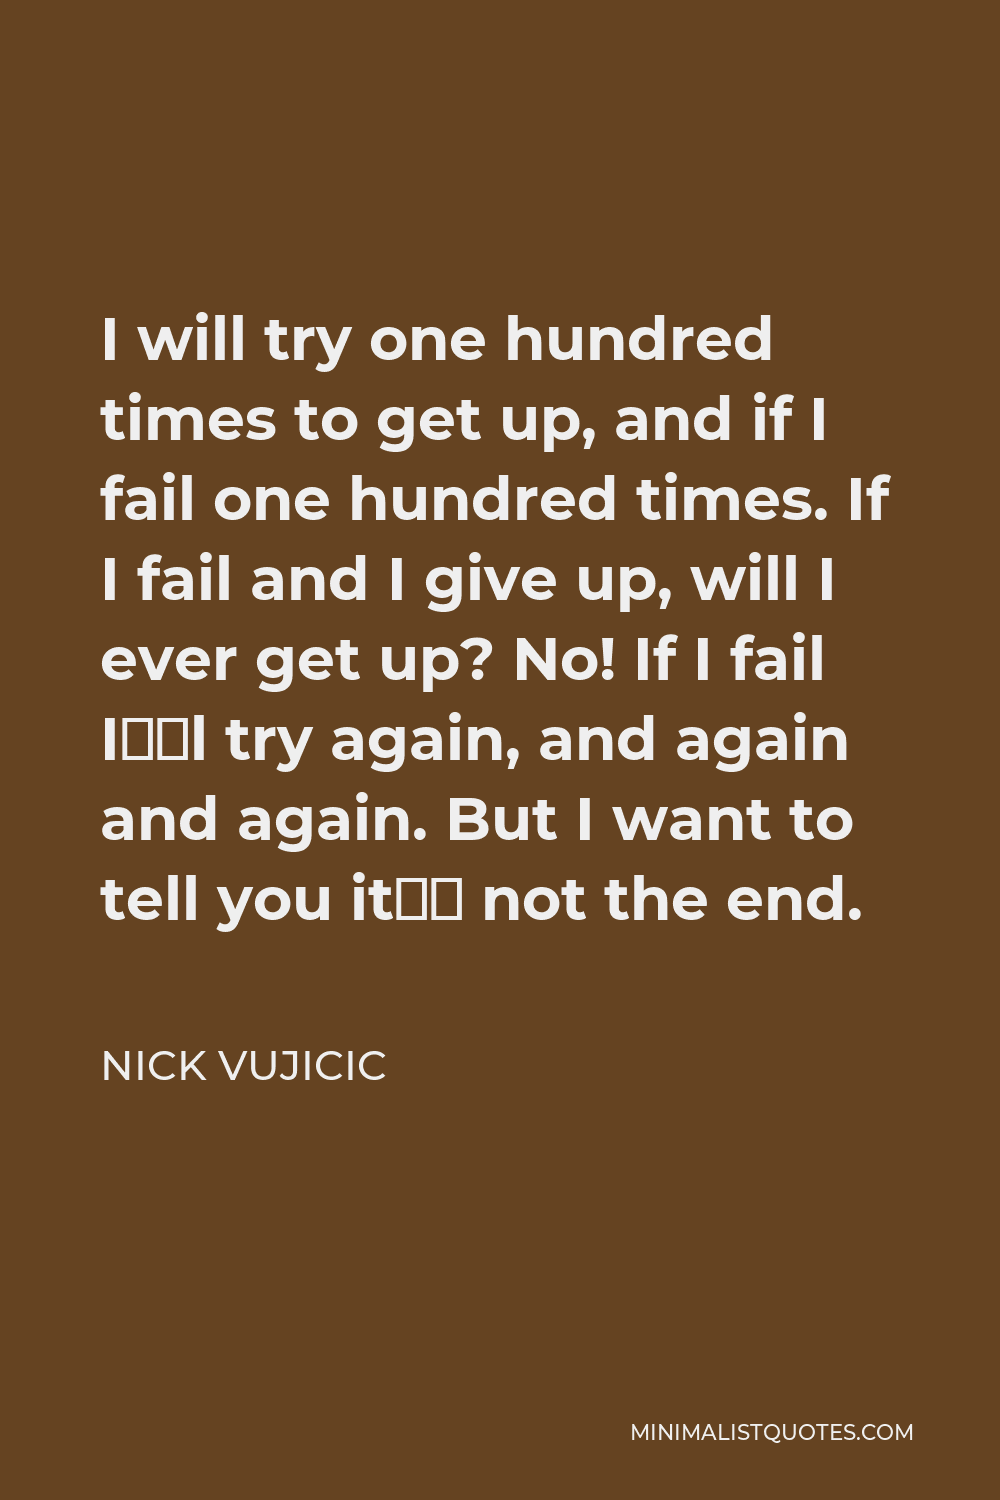 Nick Vujicic Quote - I will try one hundred times to get up, and if I fail one hundred times. If I fail and I give up, will I ever get up? No! If I fail I’ll try again, and again and again. But I want to tell you it’s not the end.